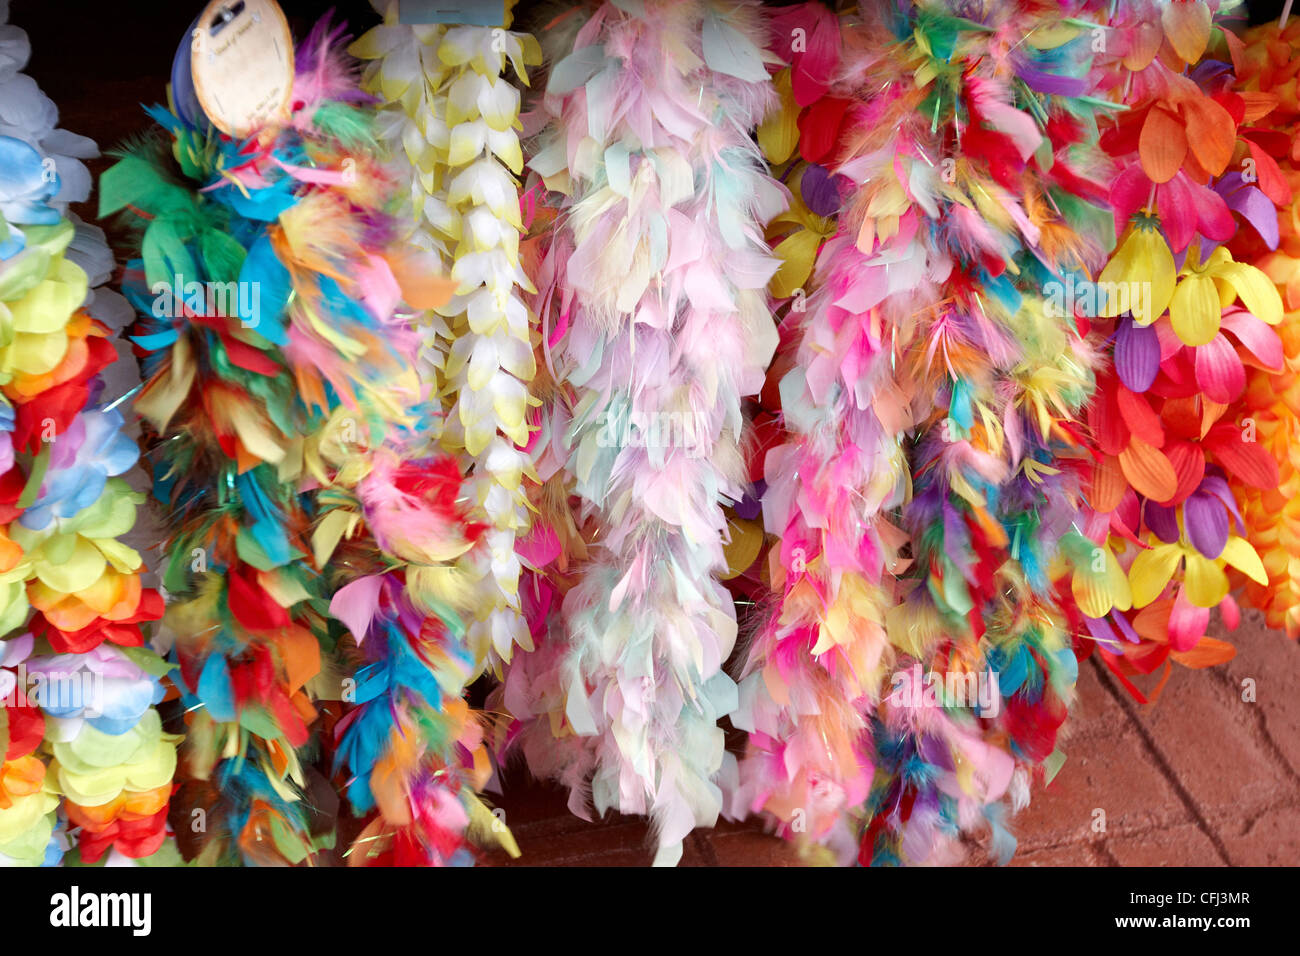 A rack of feather boas on a stall for sale Stock Photo